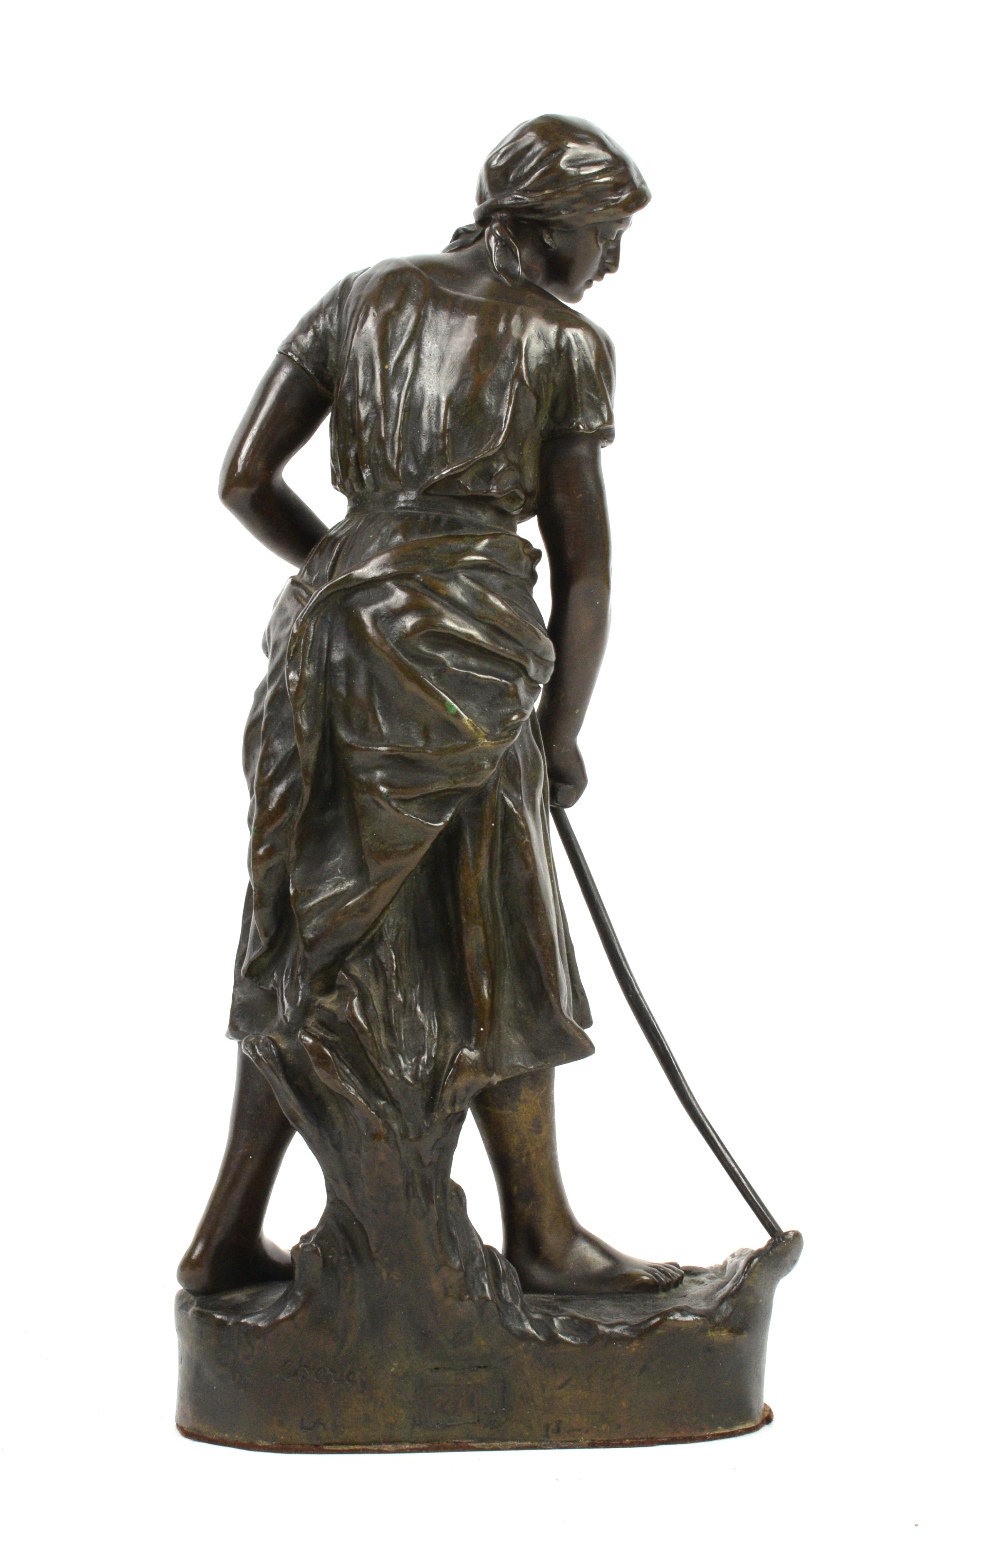 Cheze 19th century French bronze figure of a women working the land various foundry marks to base - Image 5 of 7